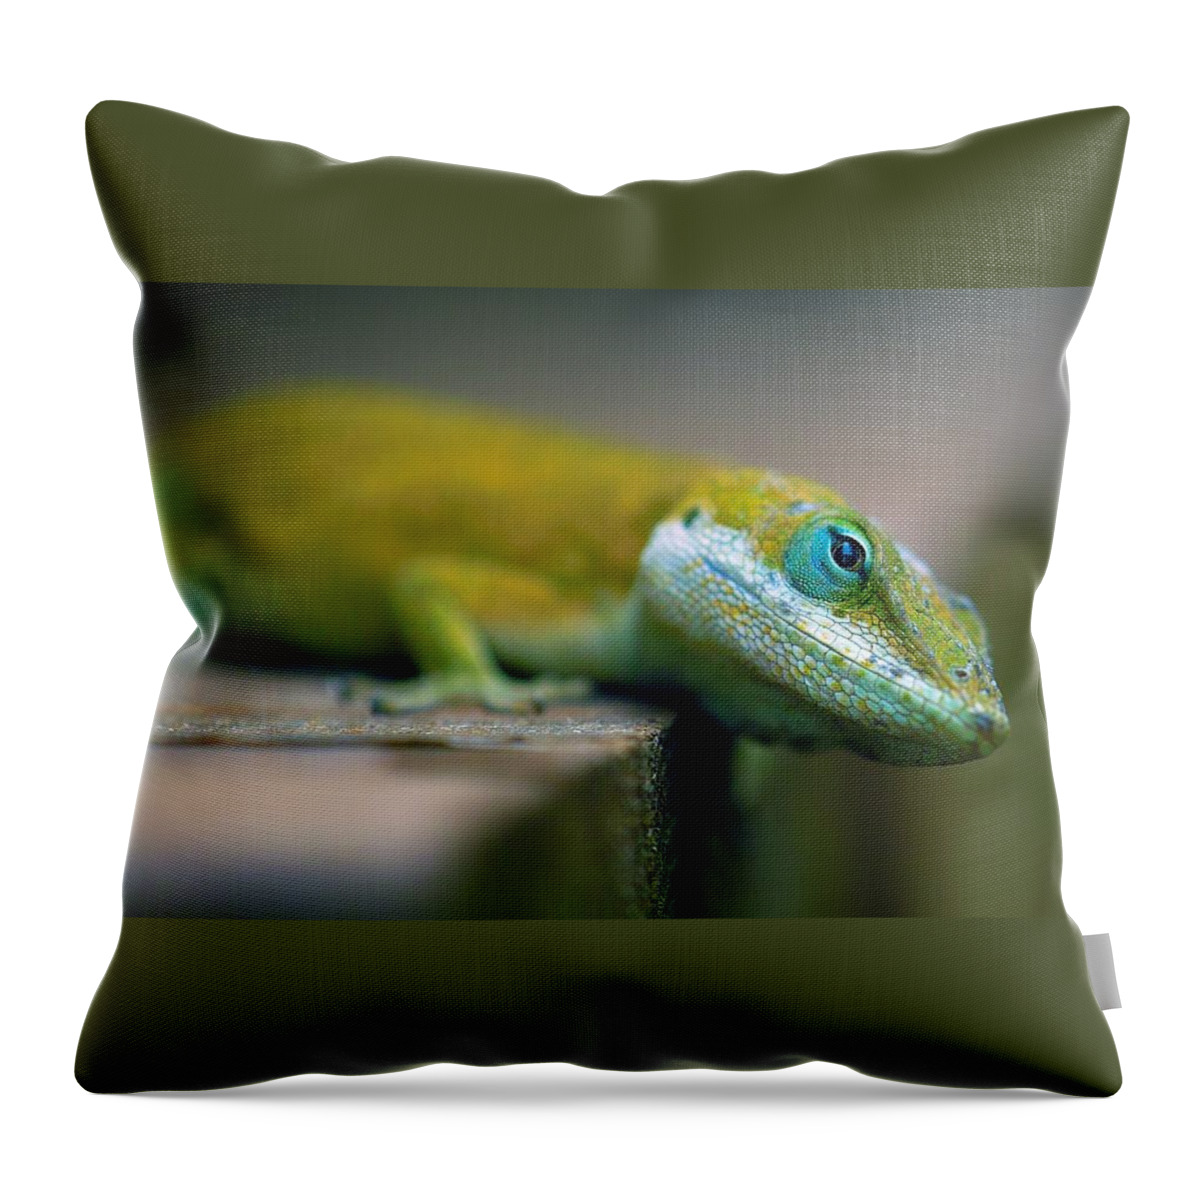 Green Anole Throw Pillow featuring the photograph Green Anole by Jackie Russo